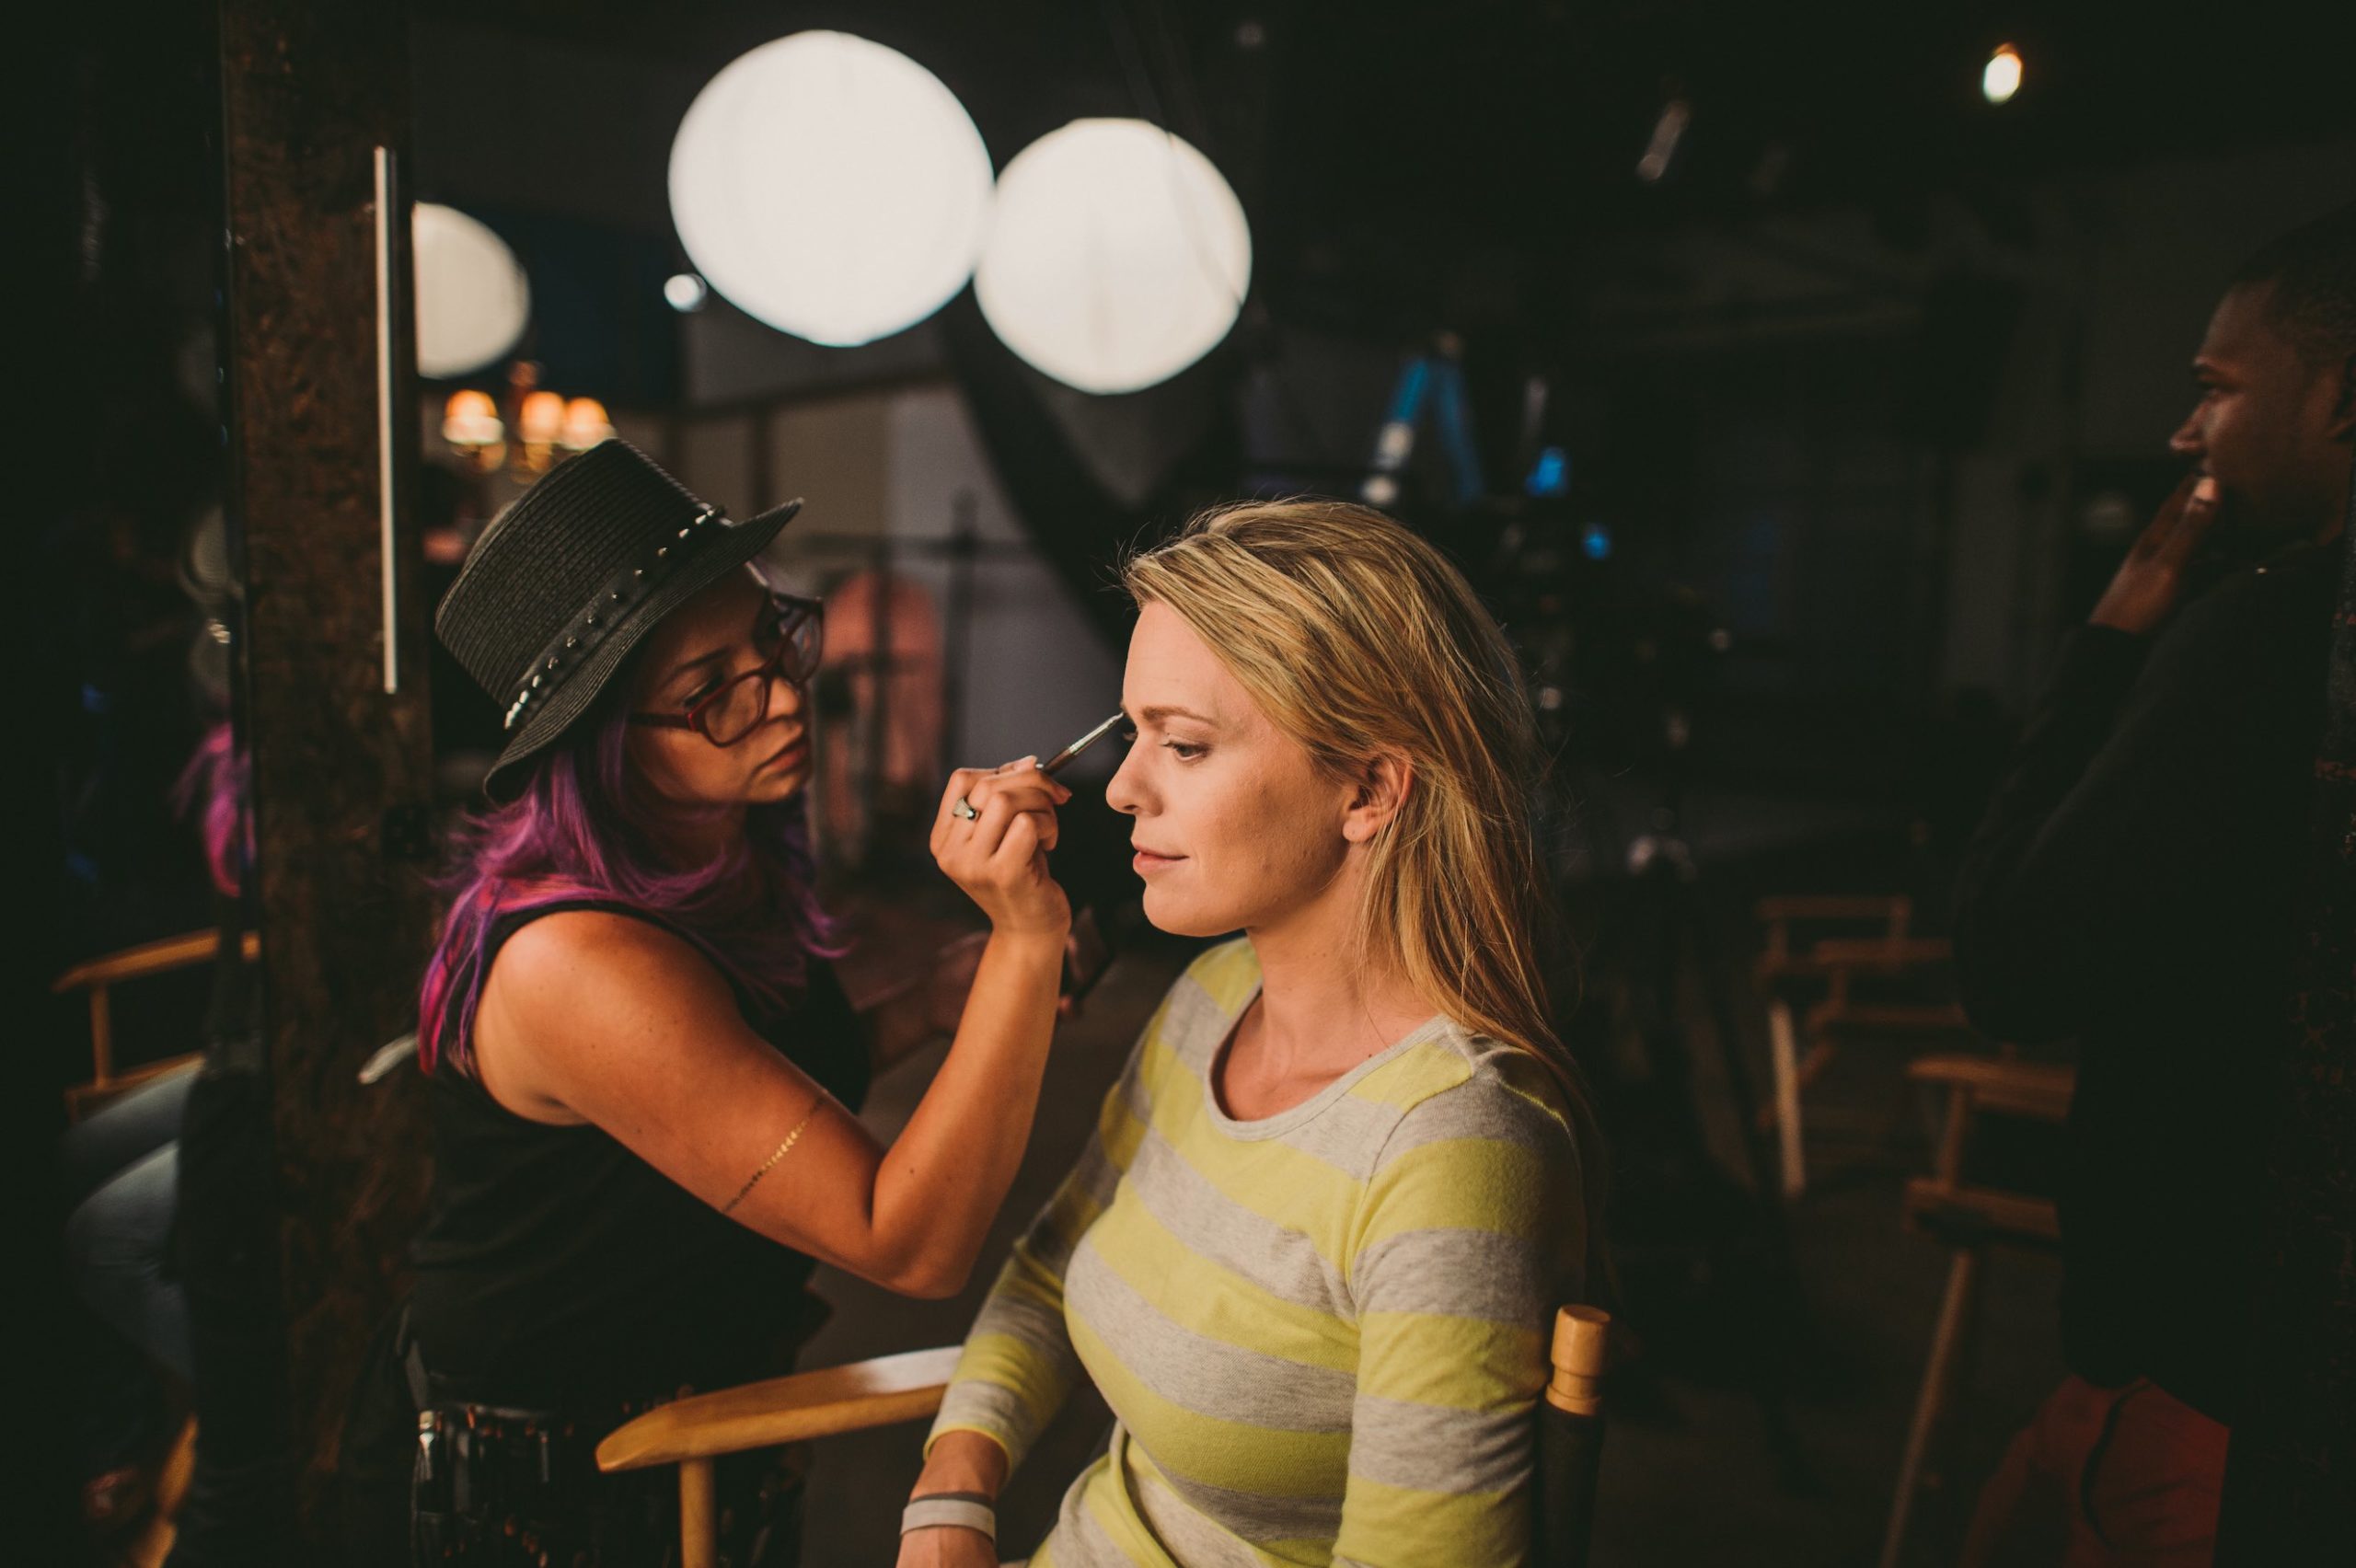 Side profile of woman getting makeup applied by a makeup artist